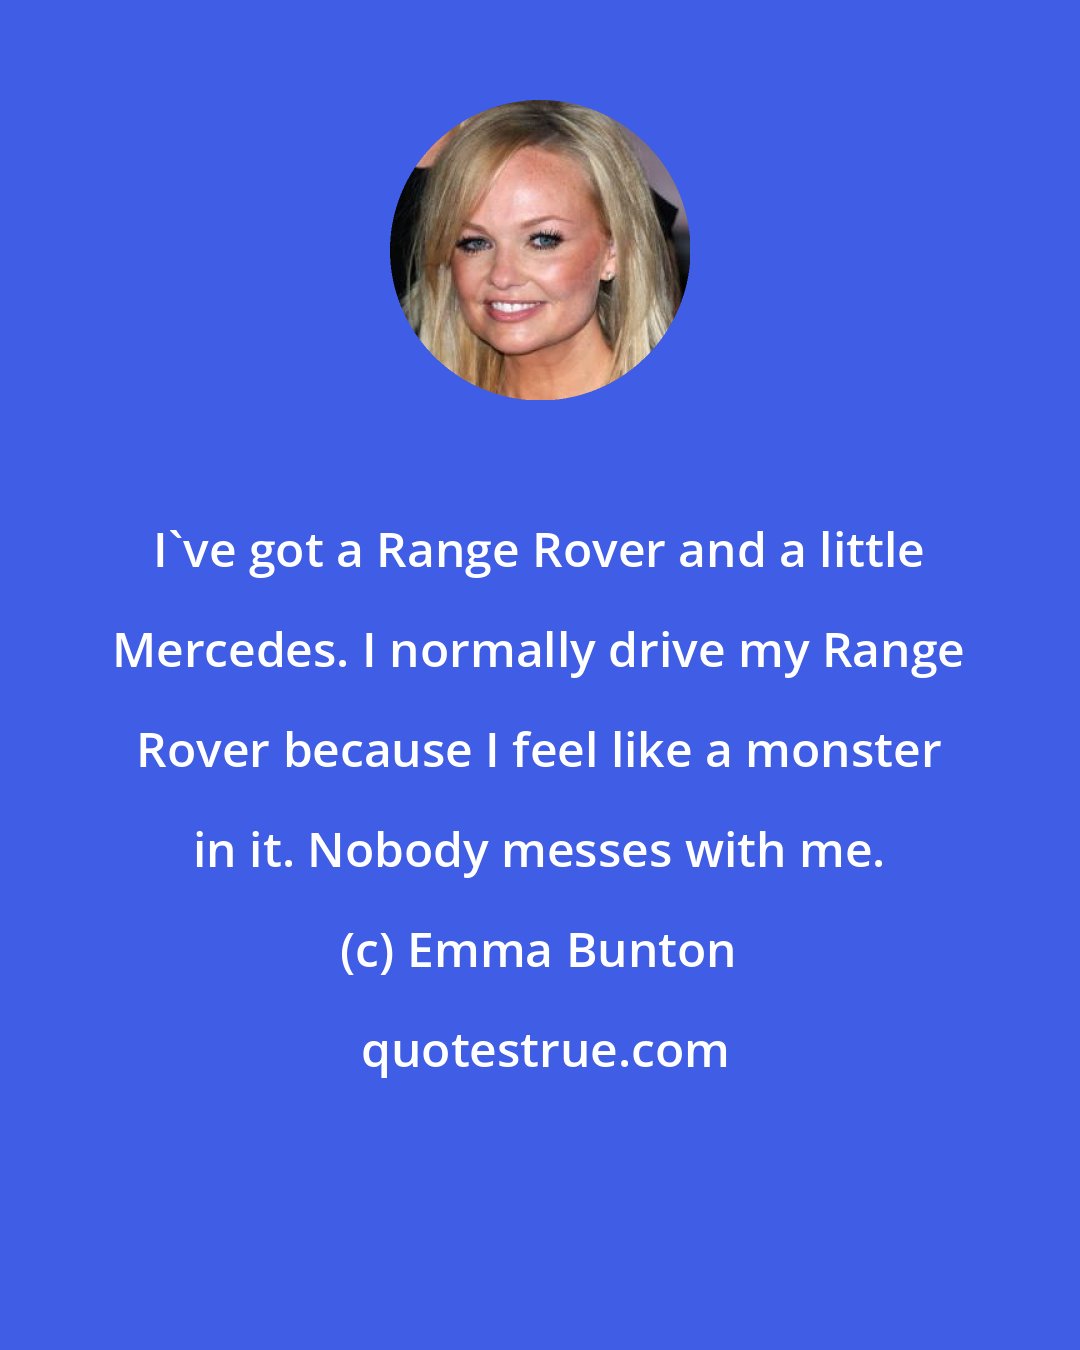 Emma Bunton: I've got a Range Rover and a little Mercedes. I normally drive my Range Rover because I feel like a monster in it. Nobody messes with me.